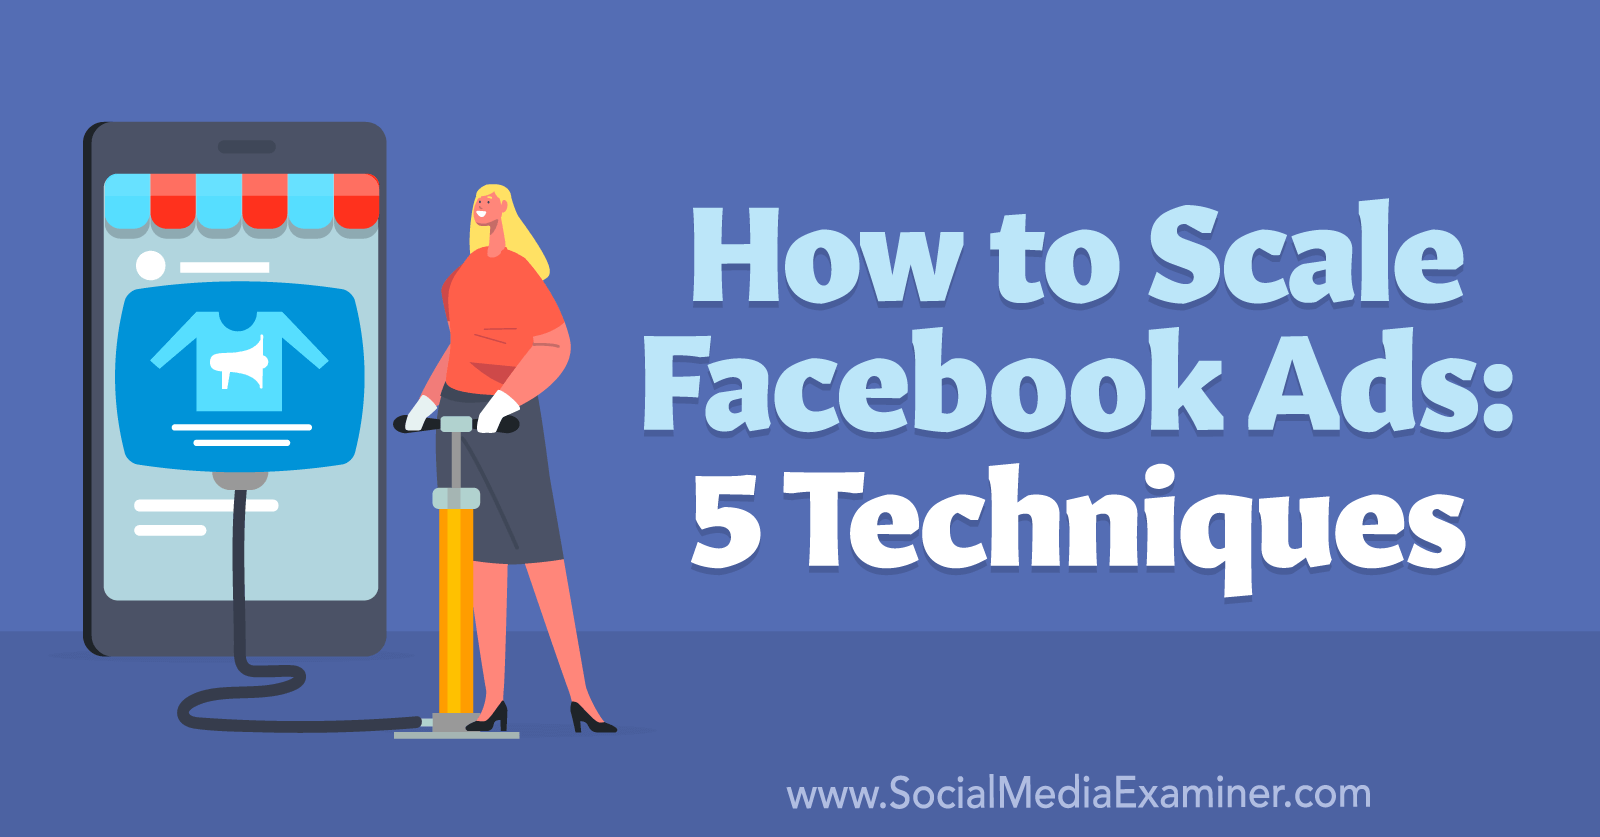 How to Scale Facebook Ads: 5 Techniques-Social Media Examiner